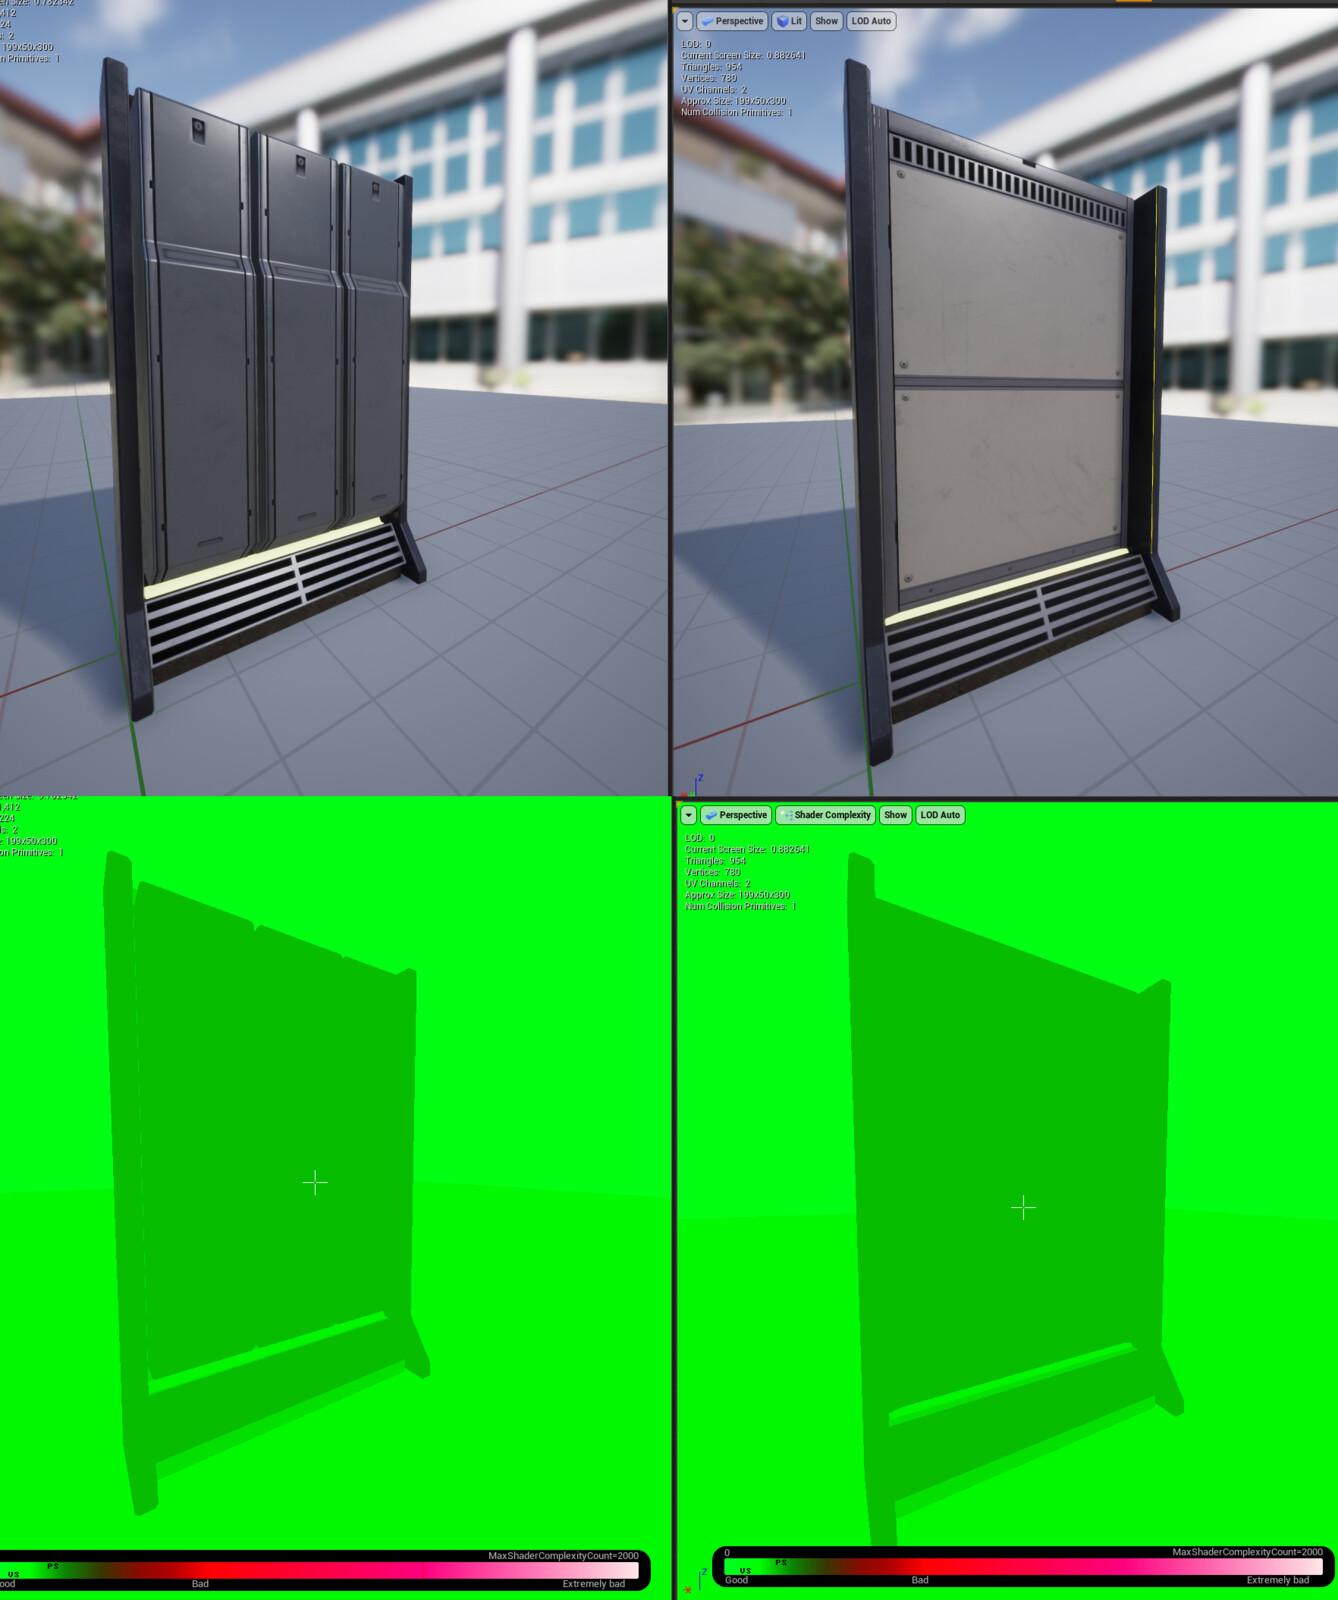 Shader complexity in engine